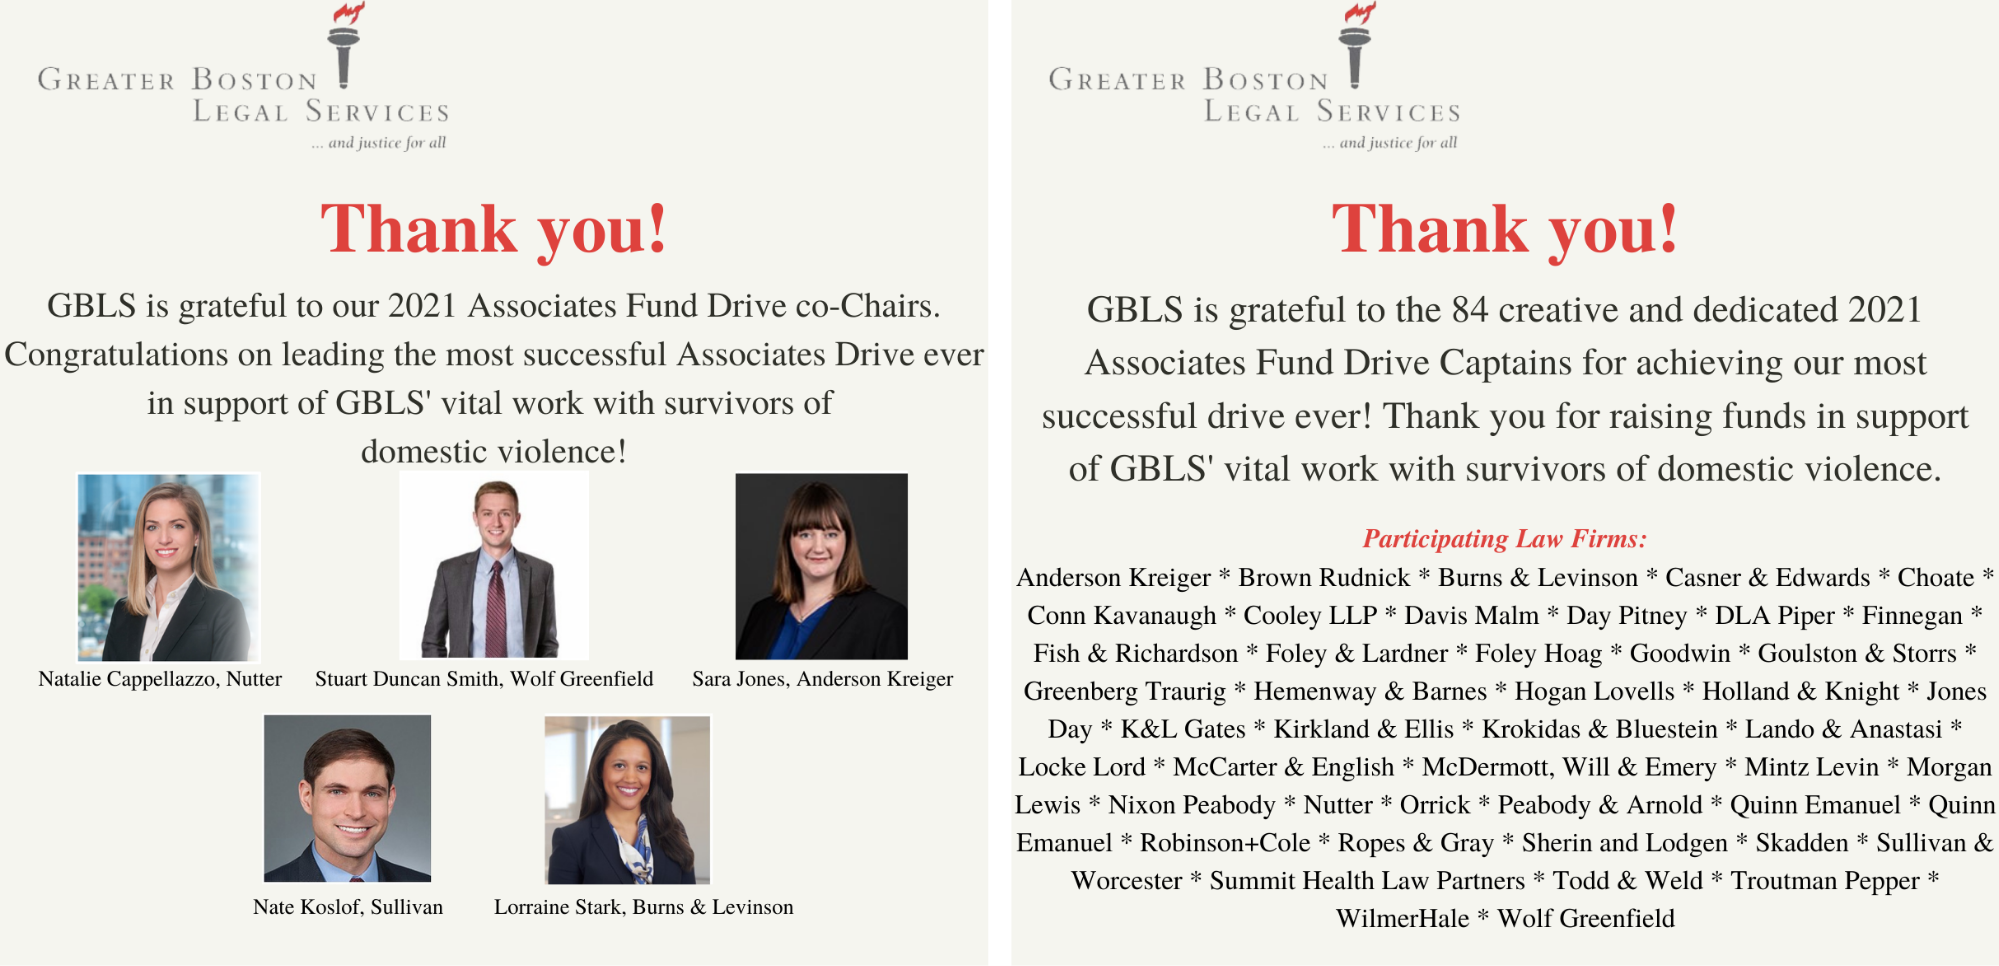 Thank you flyers for GBLS' Associates Fund Drive Co-Chairs and Captains